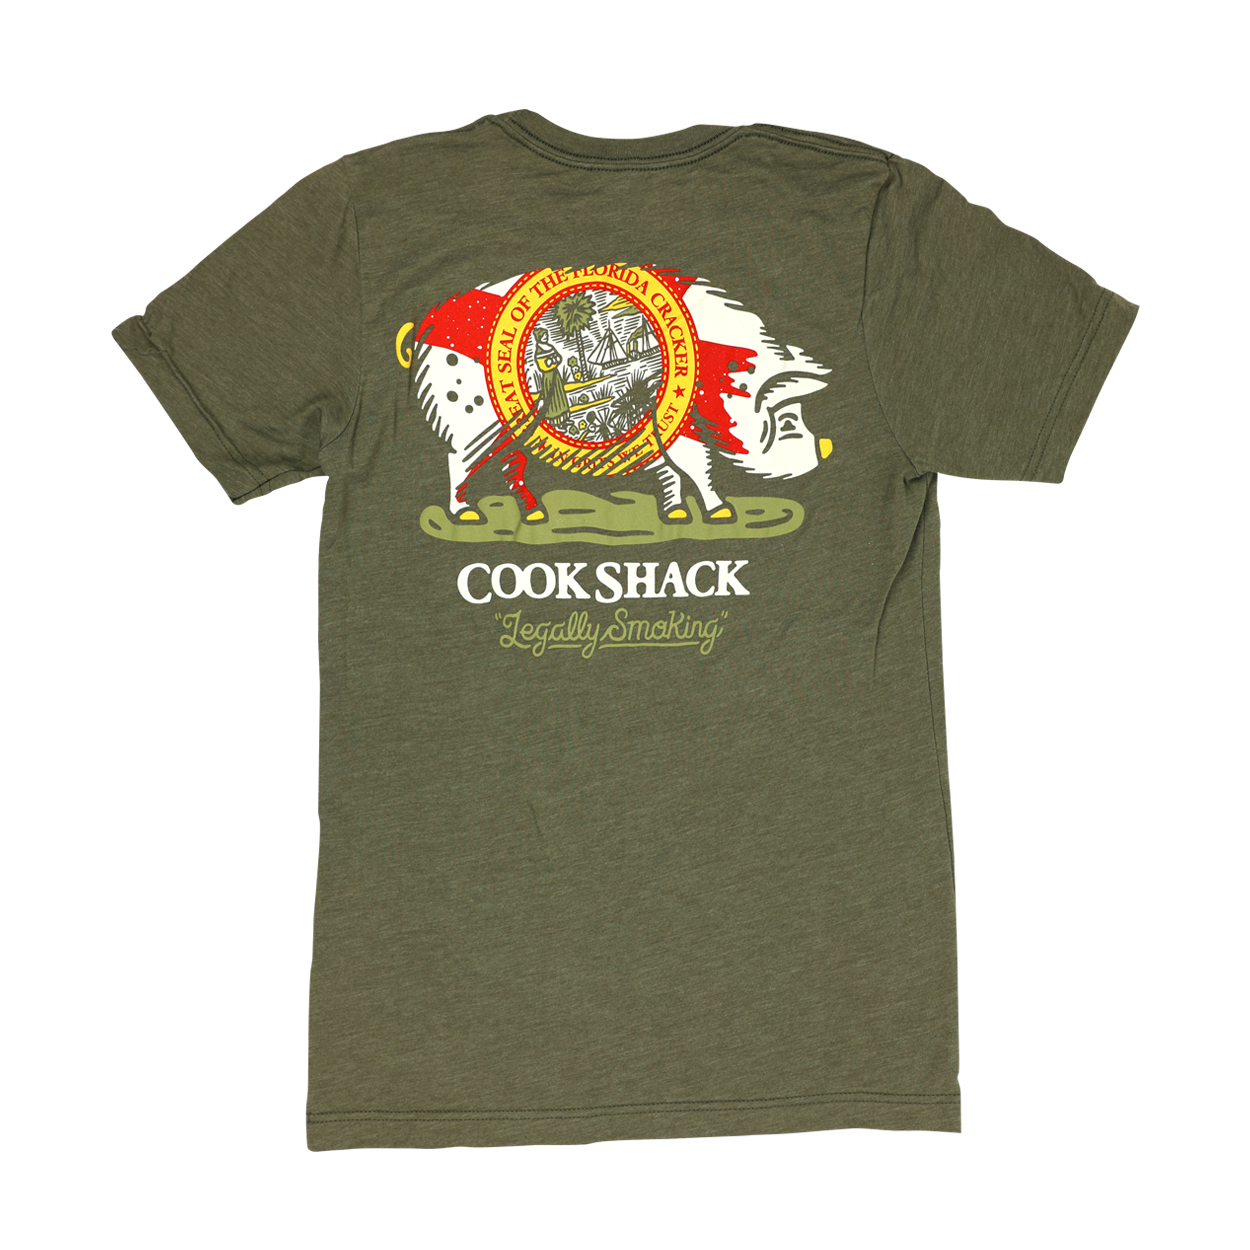 COOK SHACK STATE PIG SHIRT S/S - HEATHER OLIVE